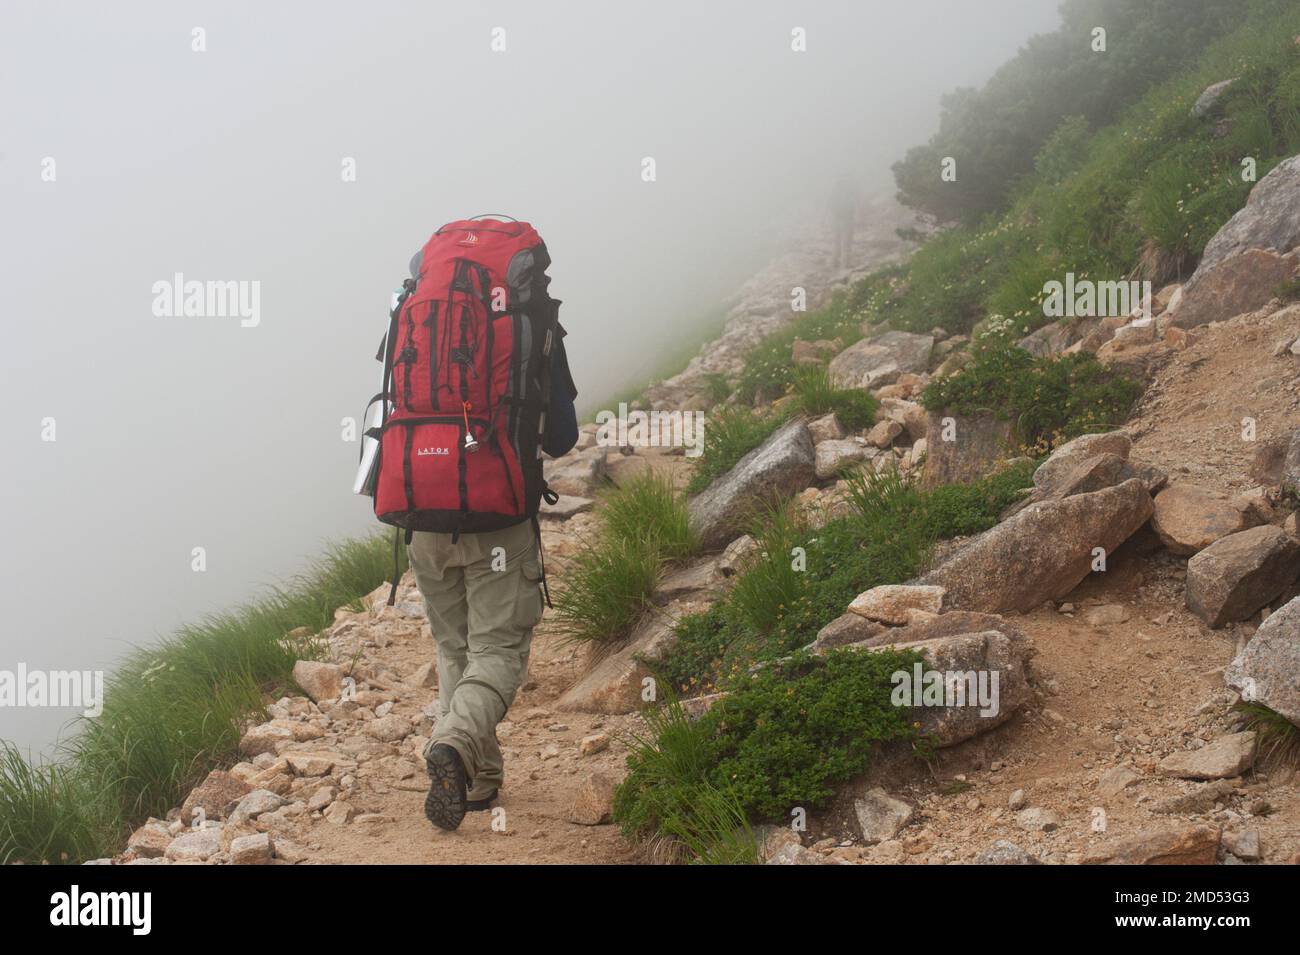 A hiker ascends a mountain path under the heavy weight of her backpack, with mist obscuring the mountainside near Mt Goryu, Nagano, japan. Stock Photo